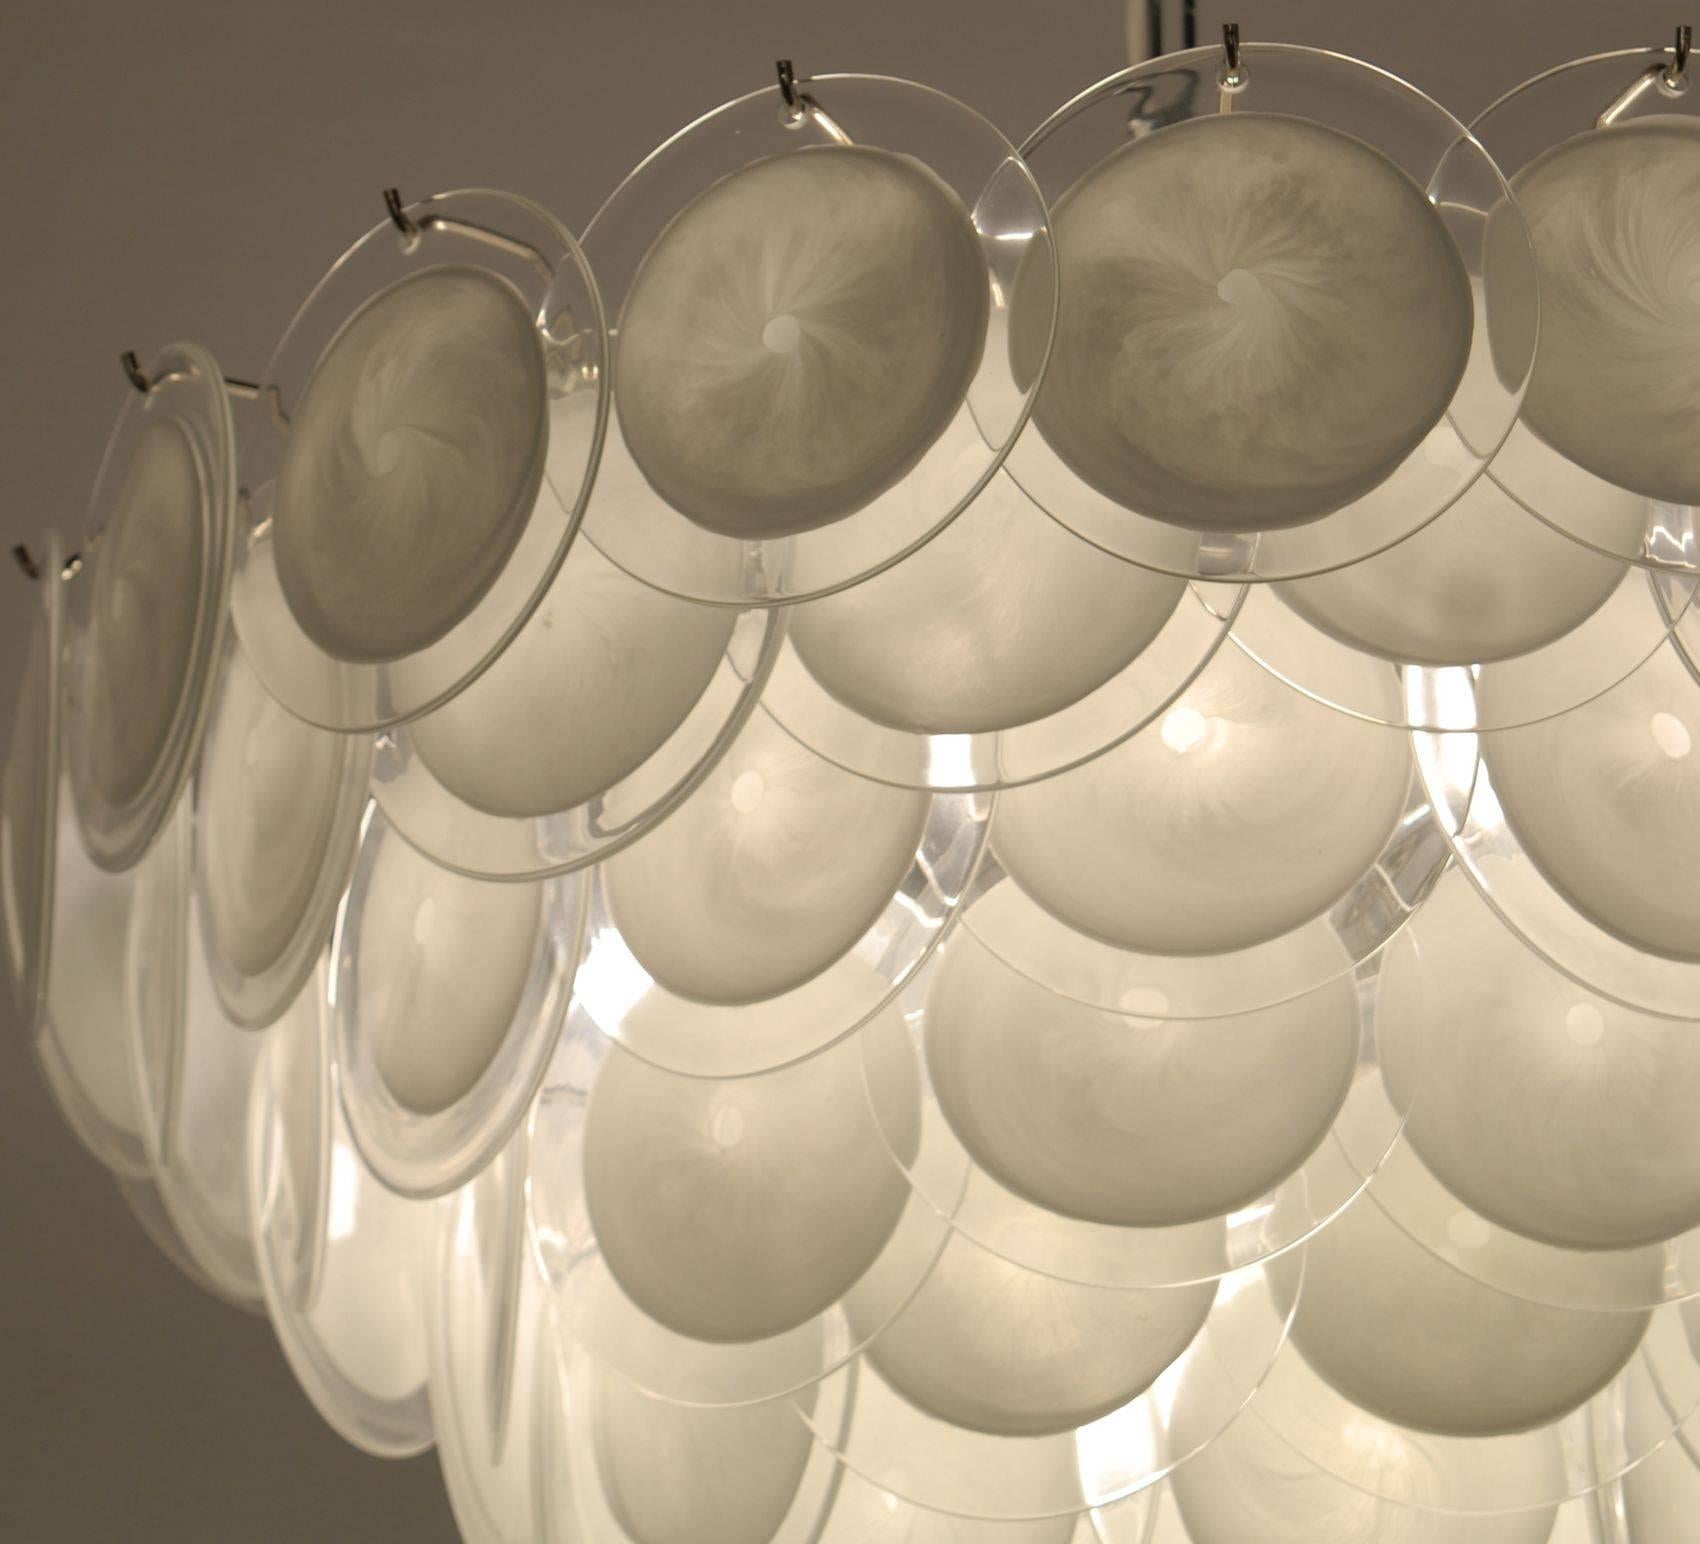 This beautiful chandelier carries over 80 discs made with the rullati technique. The same technique is used to make Renaissance windows. White glass Sommerso with clear glass, and then hand opened and flattened. Pontil mark still visible to assess